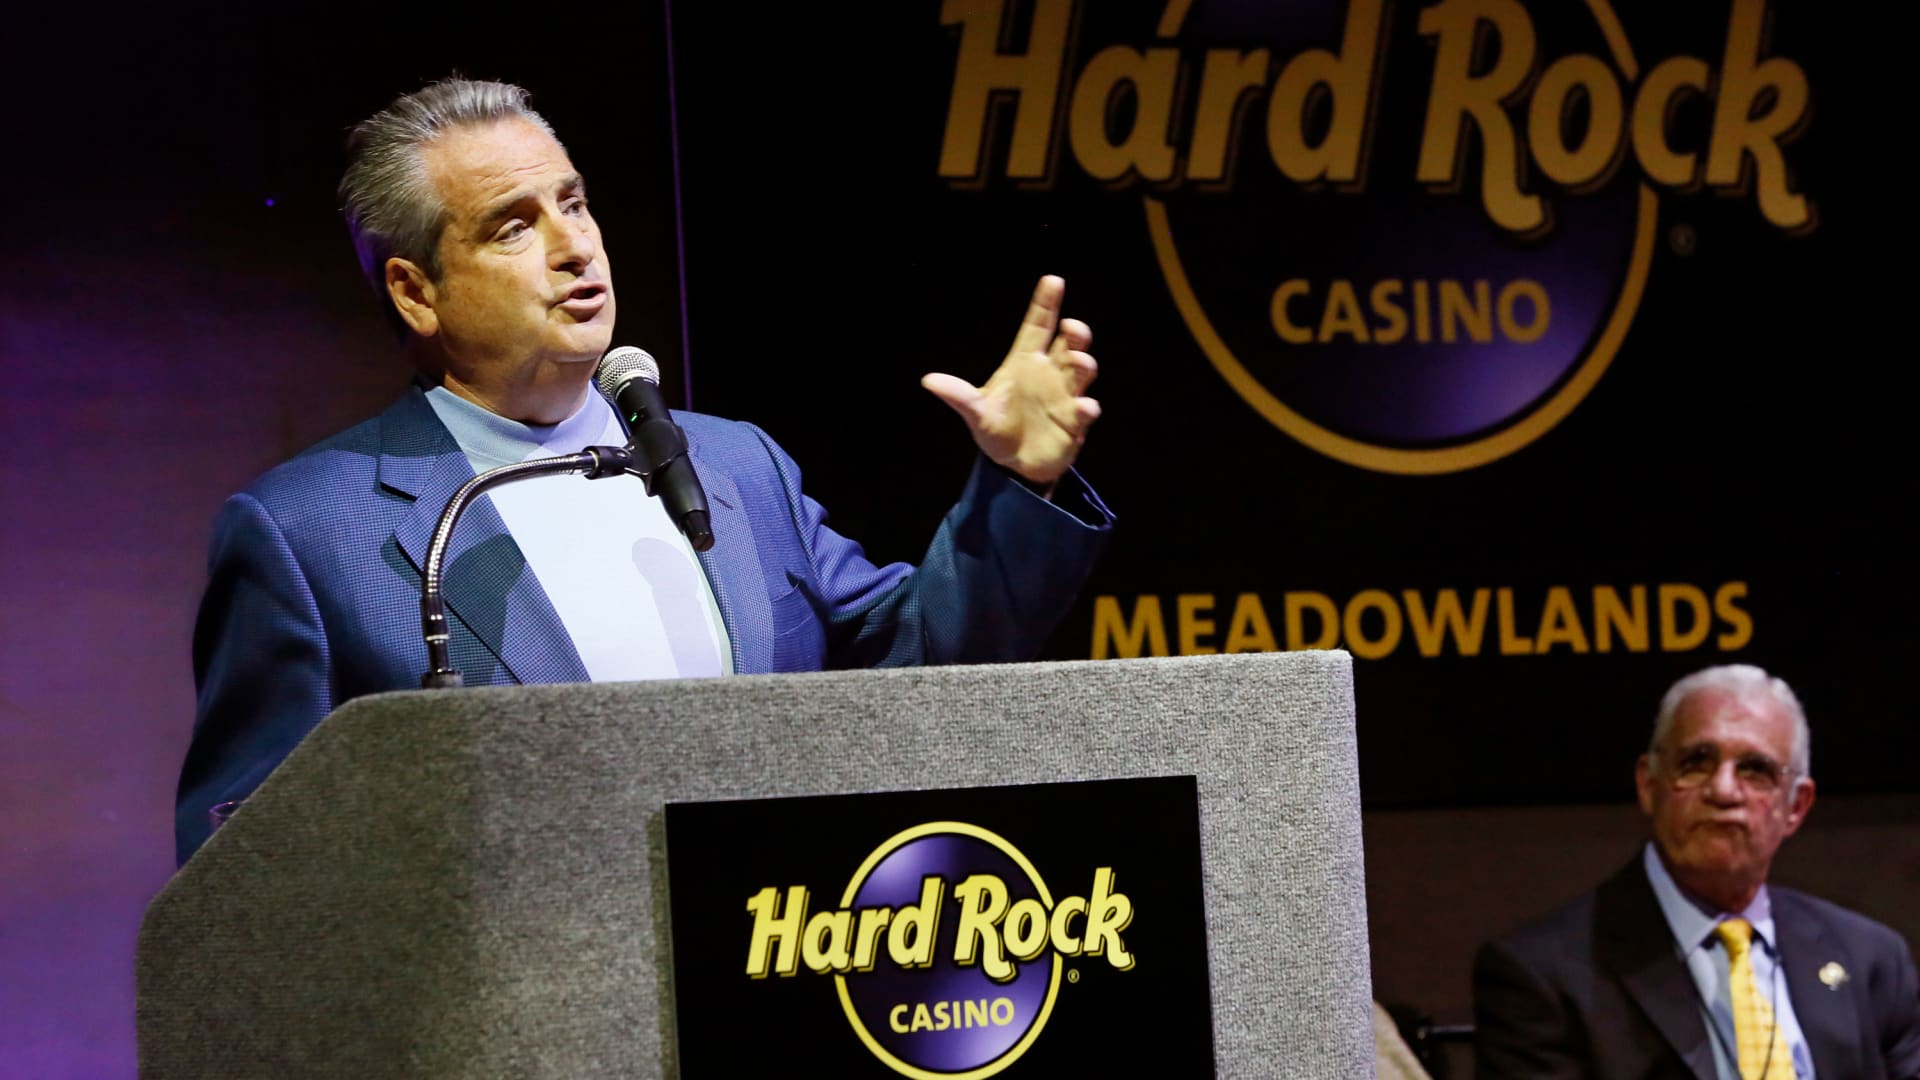 Hard Rock to spend $100 million to raise employees’ wages